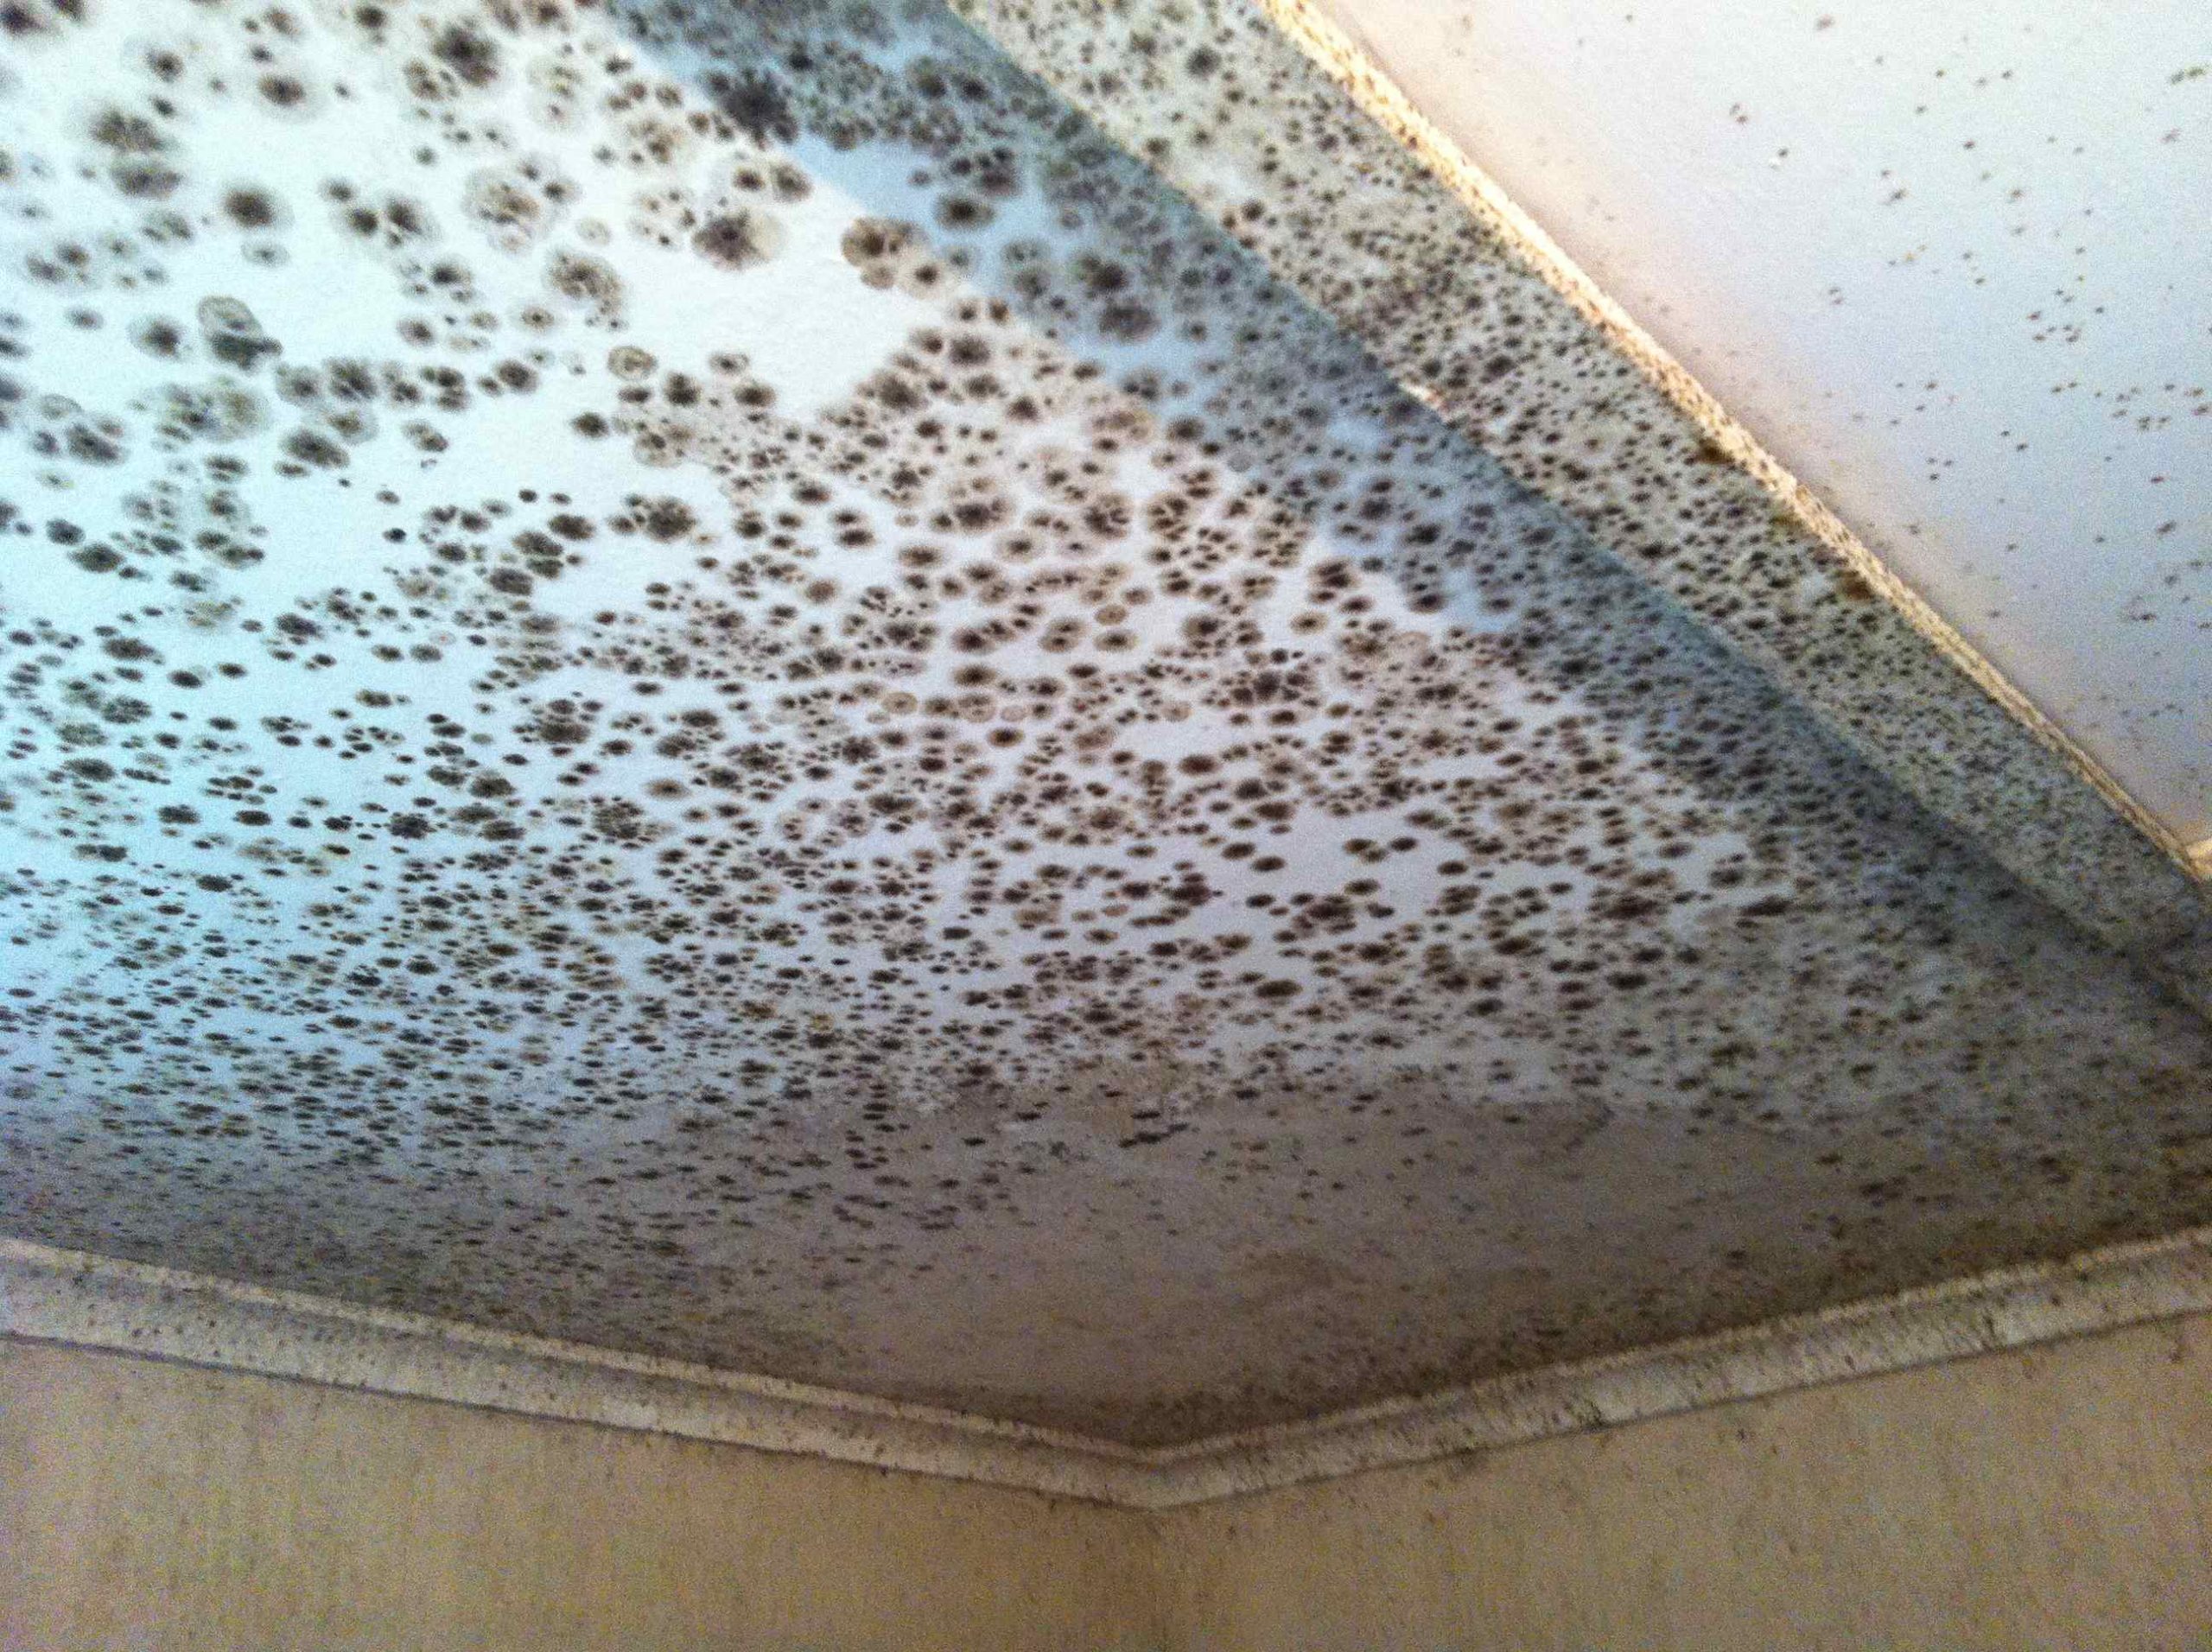 Unfriendly fungi: Dealing with a mouldy house – CSIROscope